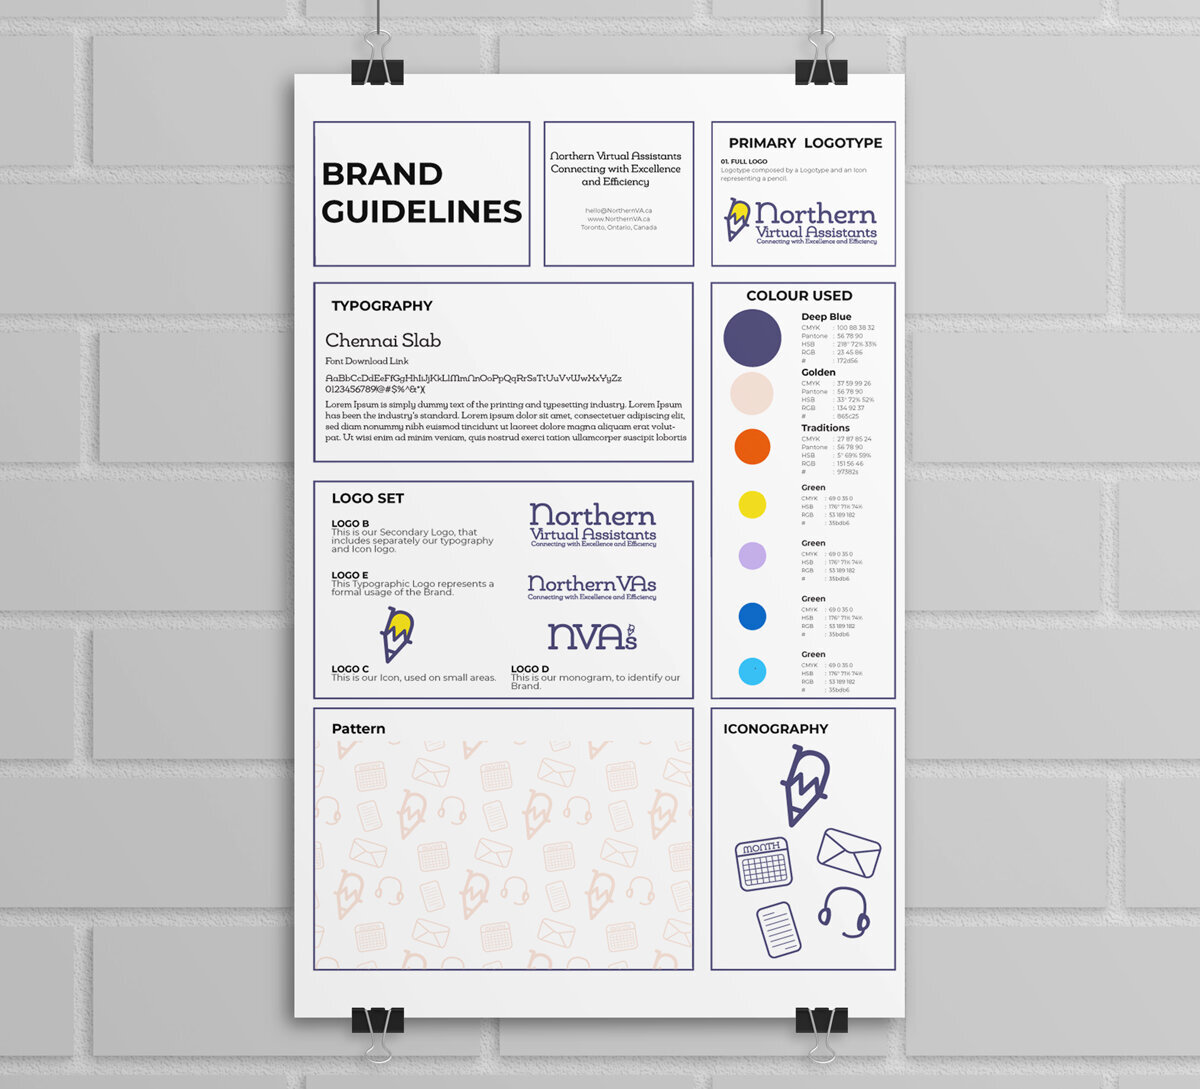 This photo shows a Brand Guidelines poster, that you receive when creating your Brand Identity or Visual Identity with ATamez Design